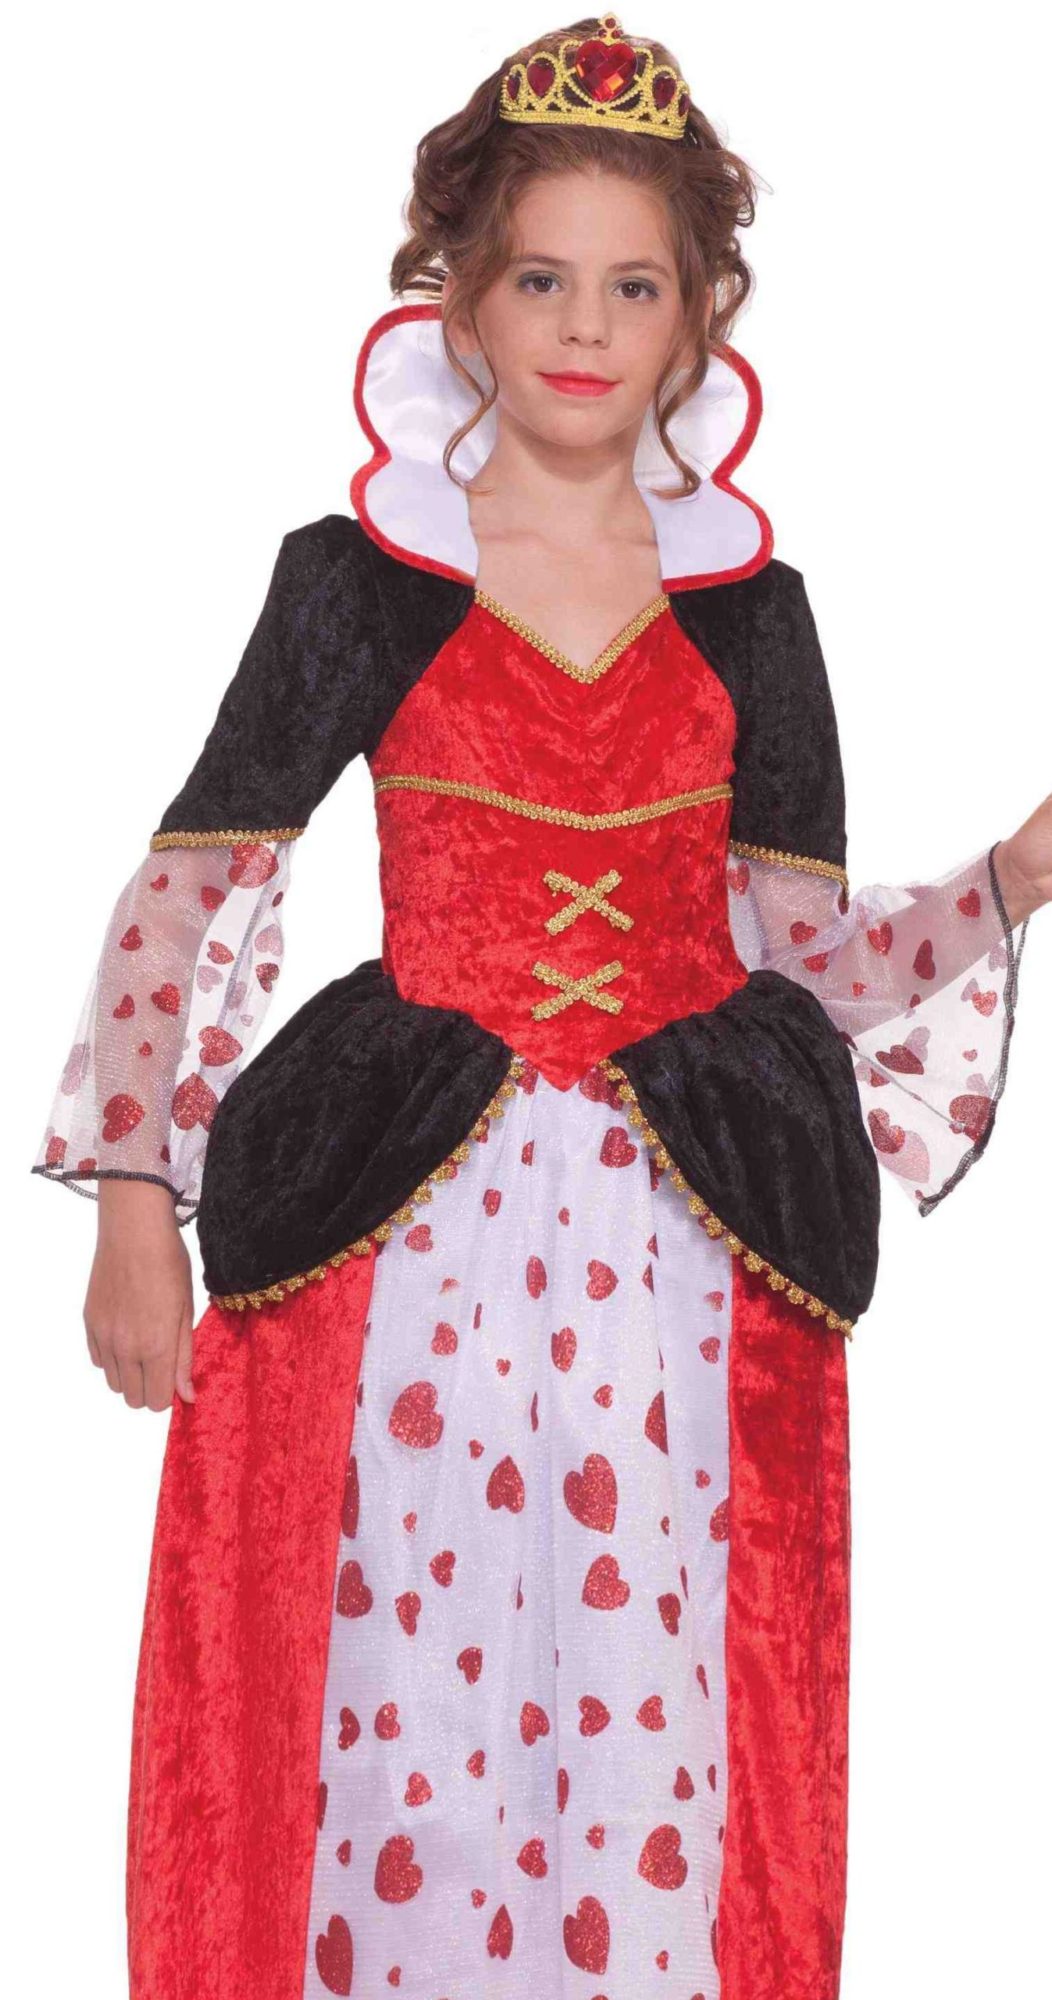 Queen of Hearts Child - Candy's Costume Shop